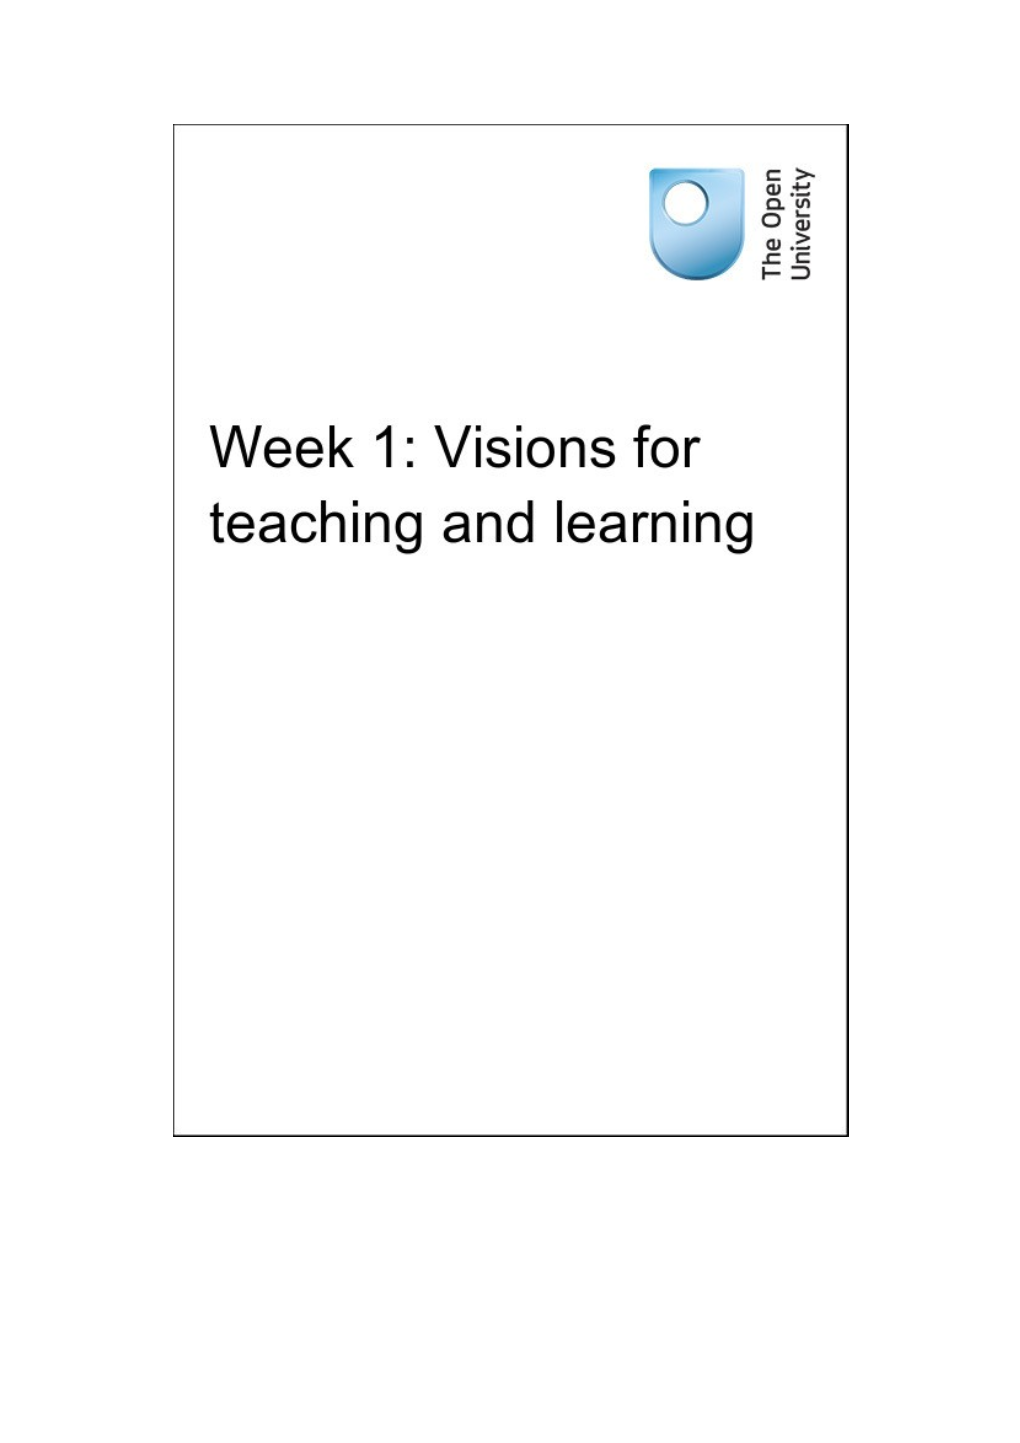 Week 1: Visions for Teaching and Learning